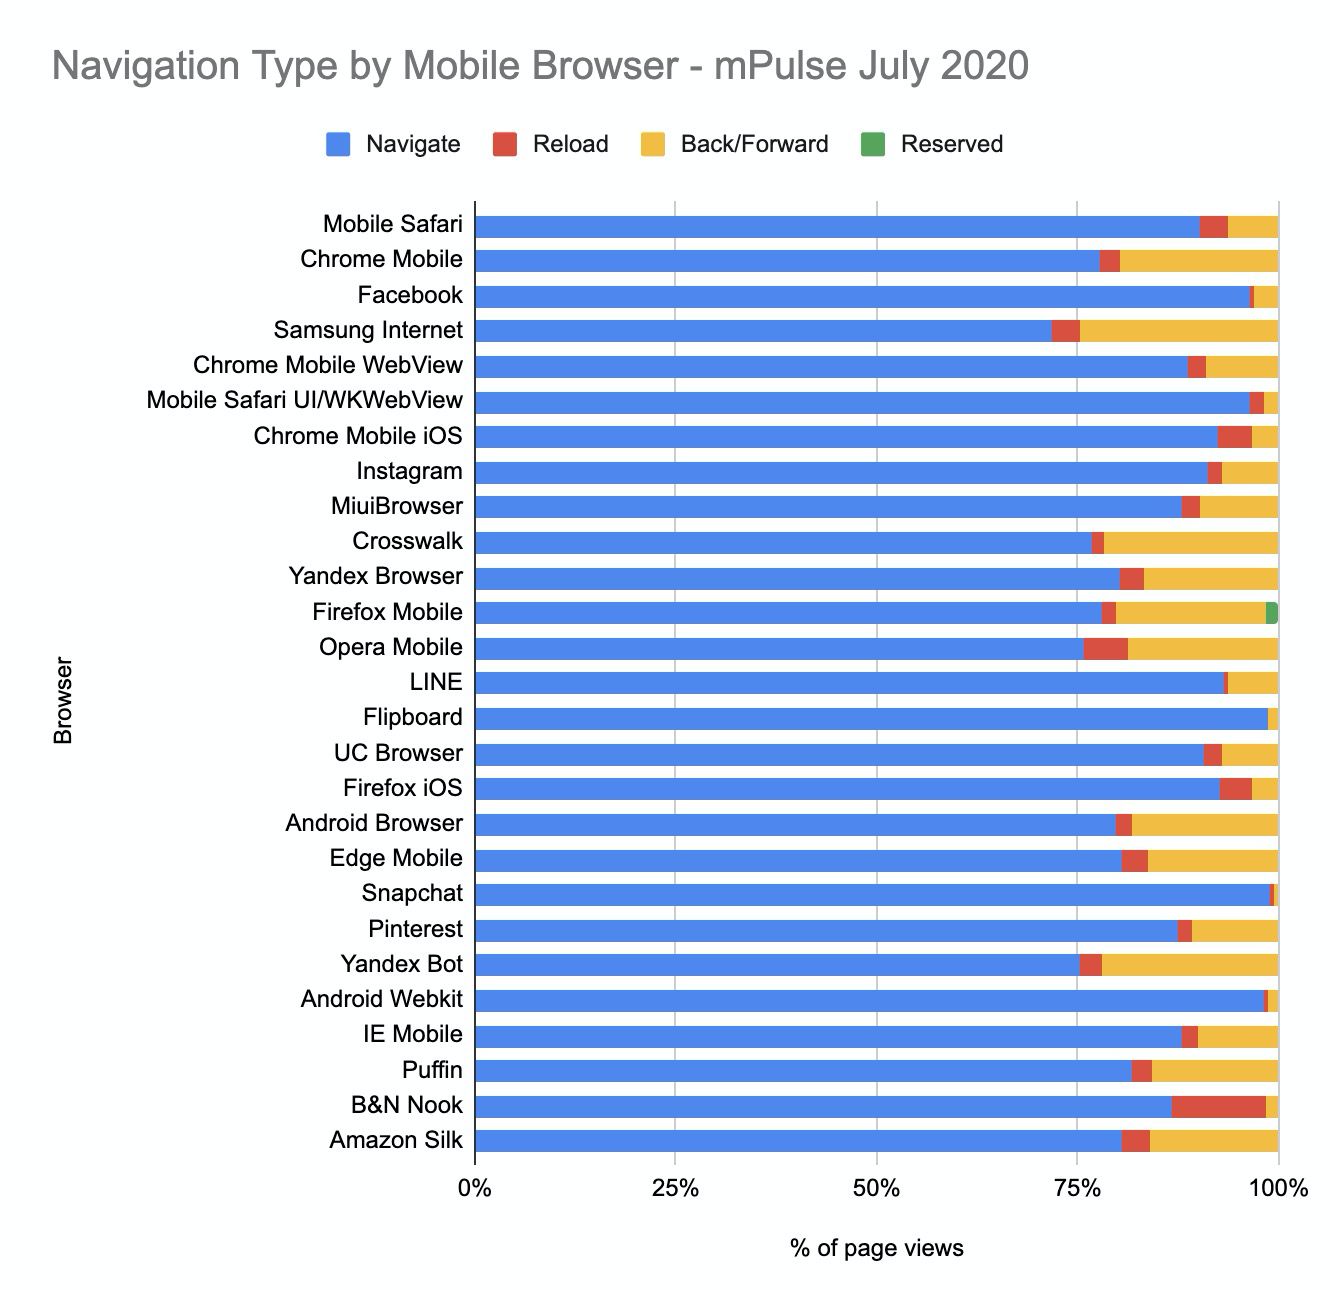 Navigation Types by Mobile Browser